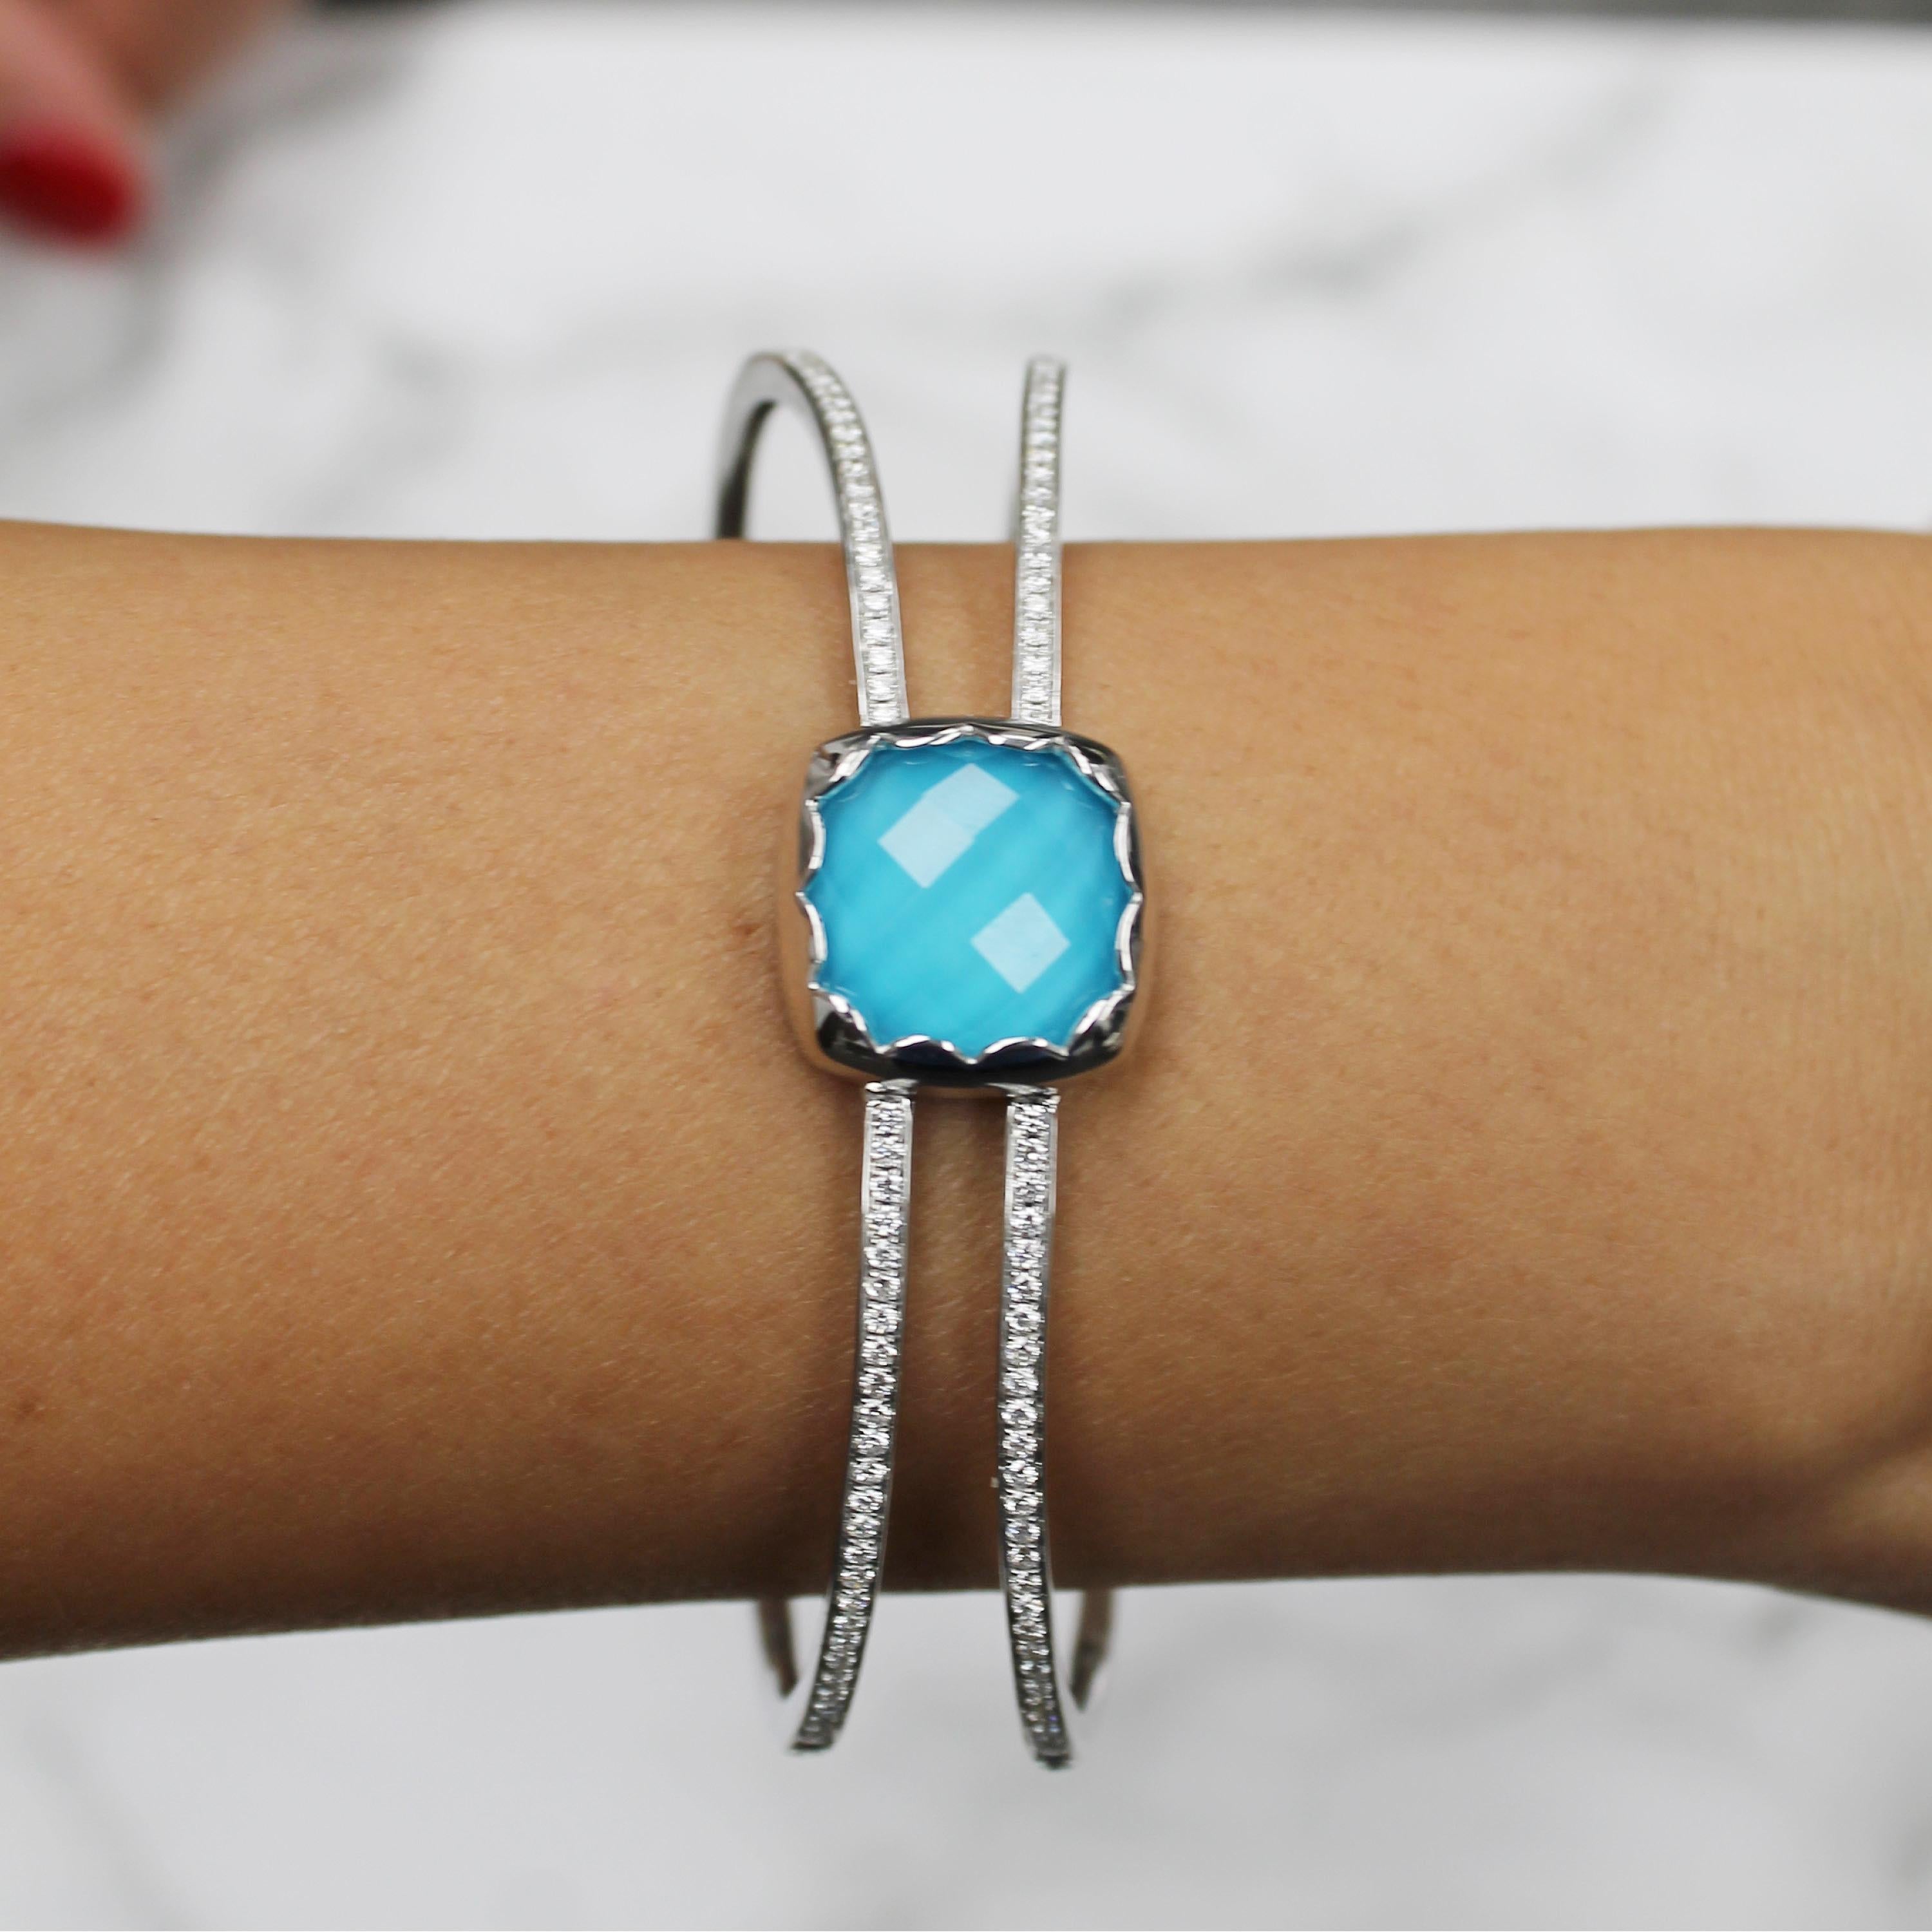 St. Barths Blue Cuff Bracelet featuring a cushion, checker-cut, White Topaz layered with Natural Arizona Turquoise, with an invisible hinge enclosure, set in 18K white gold. The St. Barths Blue collection from Doves by Doron Paloma takes you to the